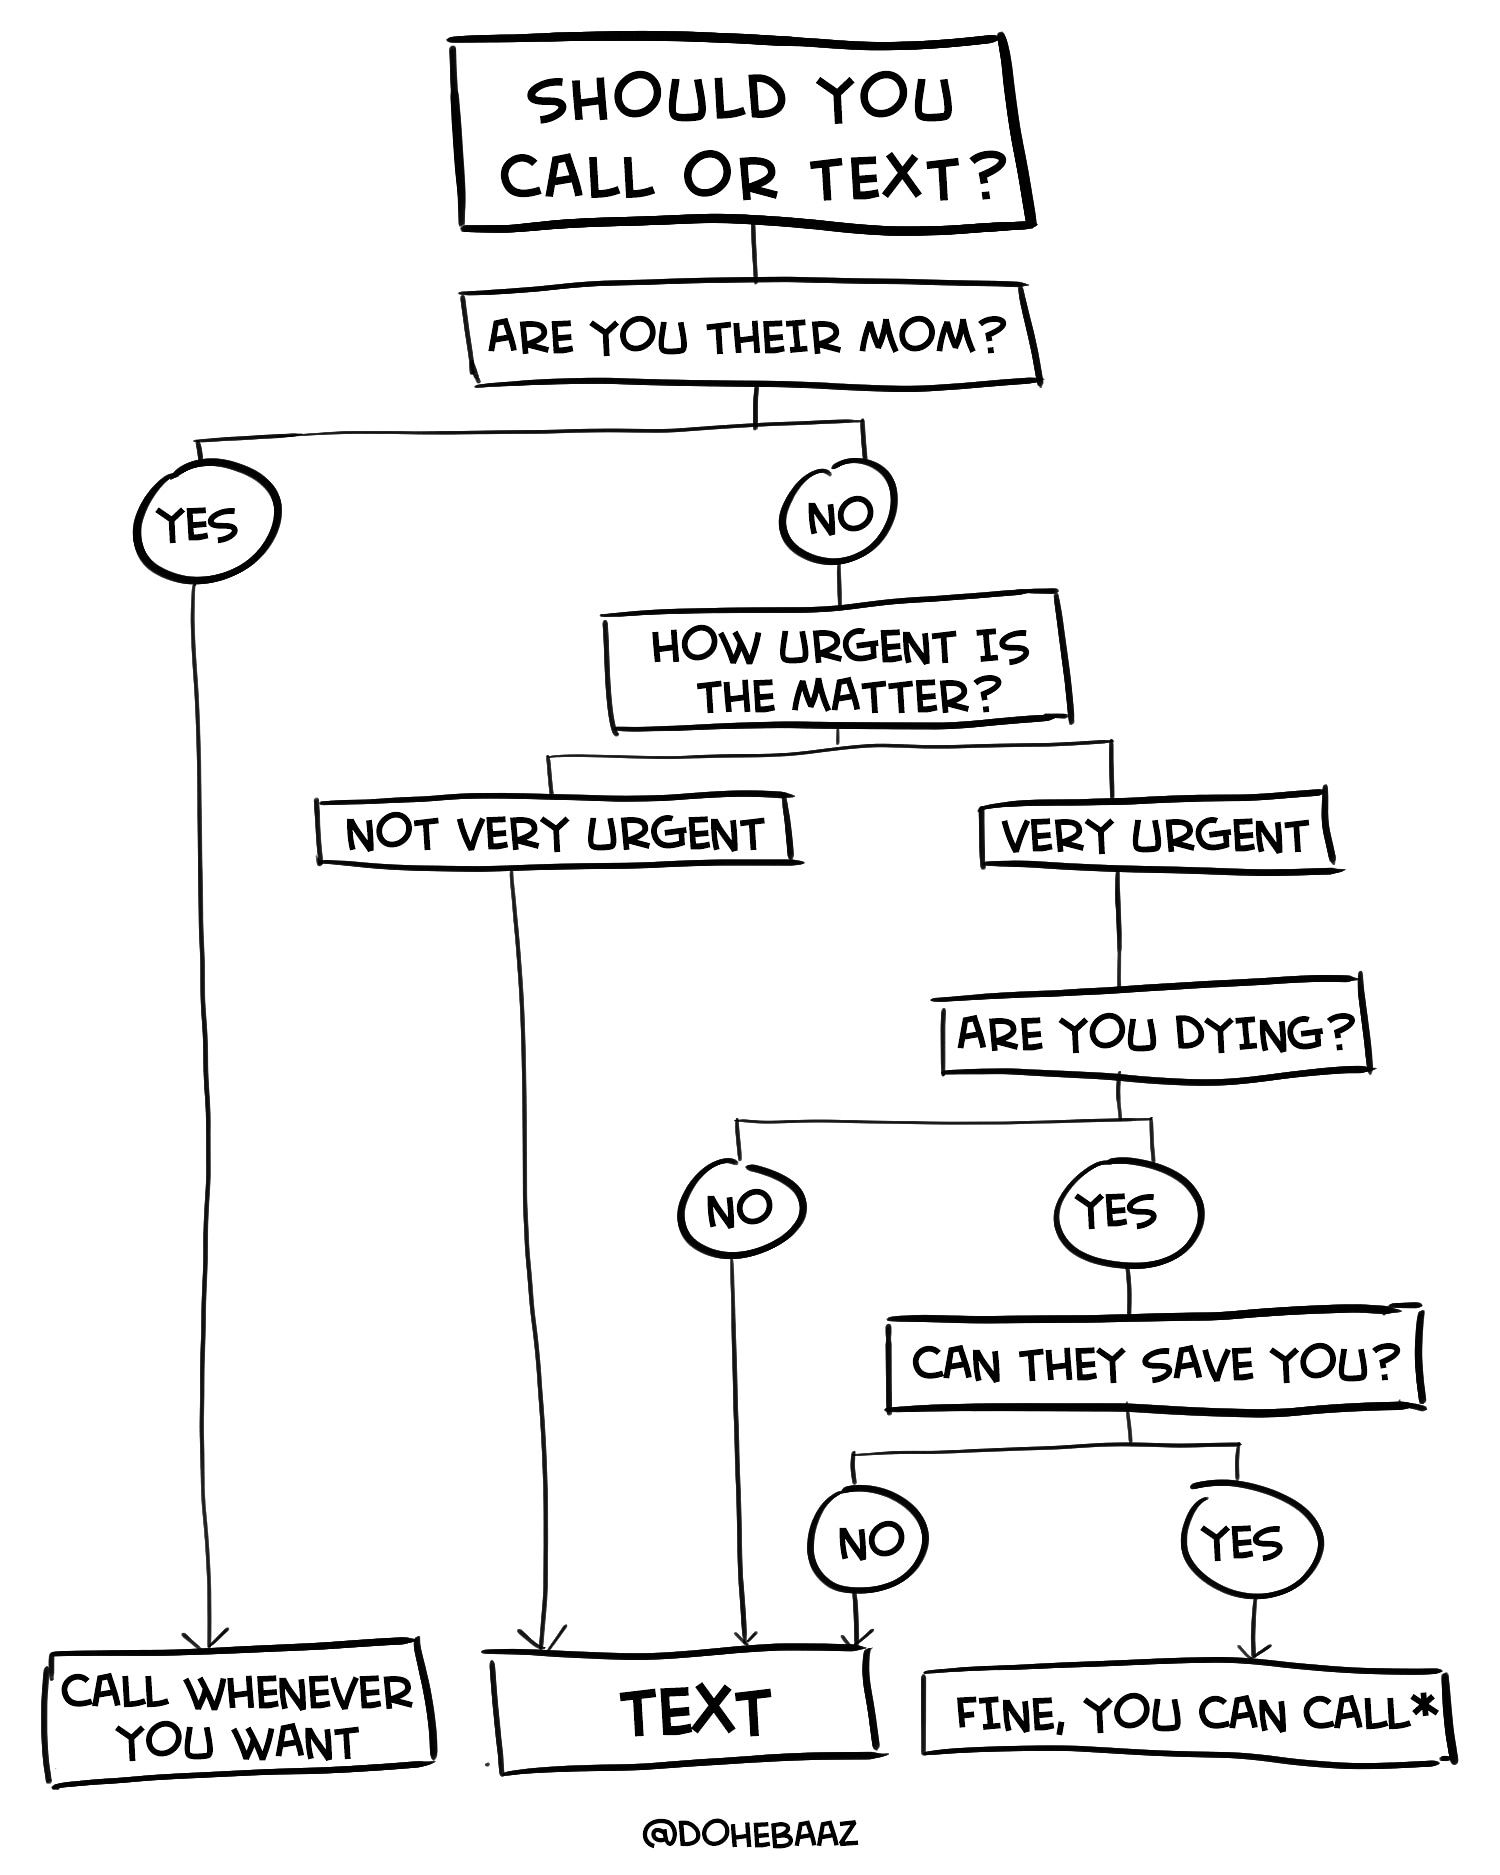 A flowchart everyone should be familiar with.